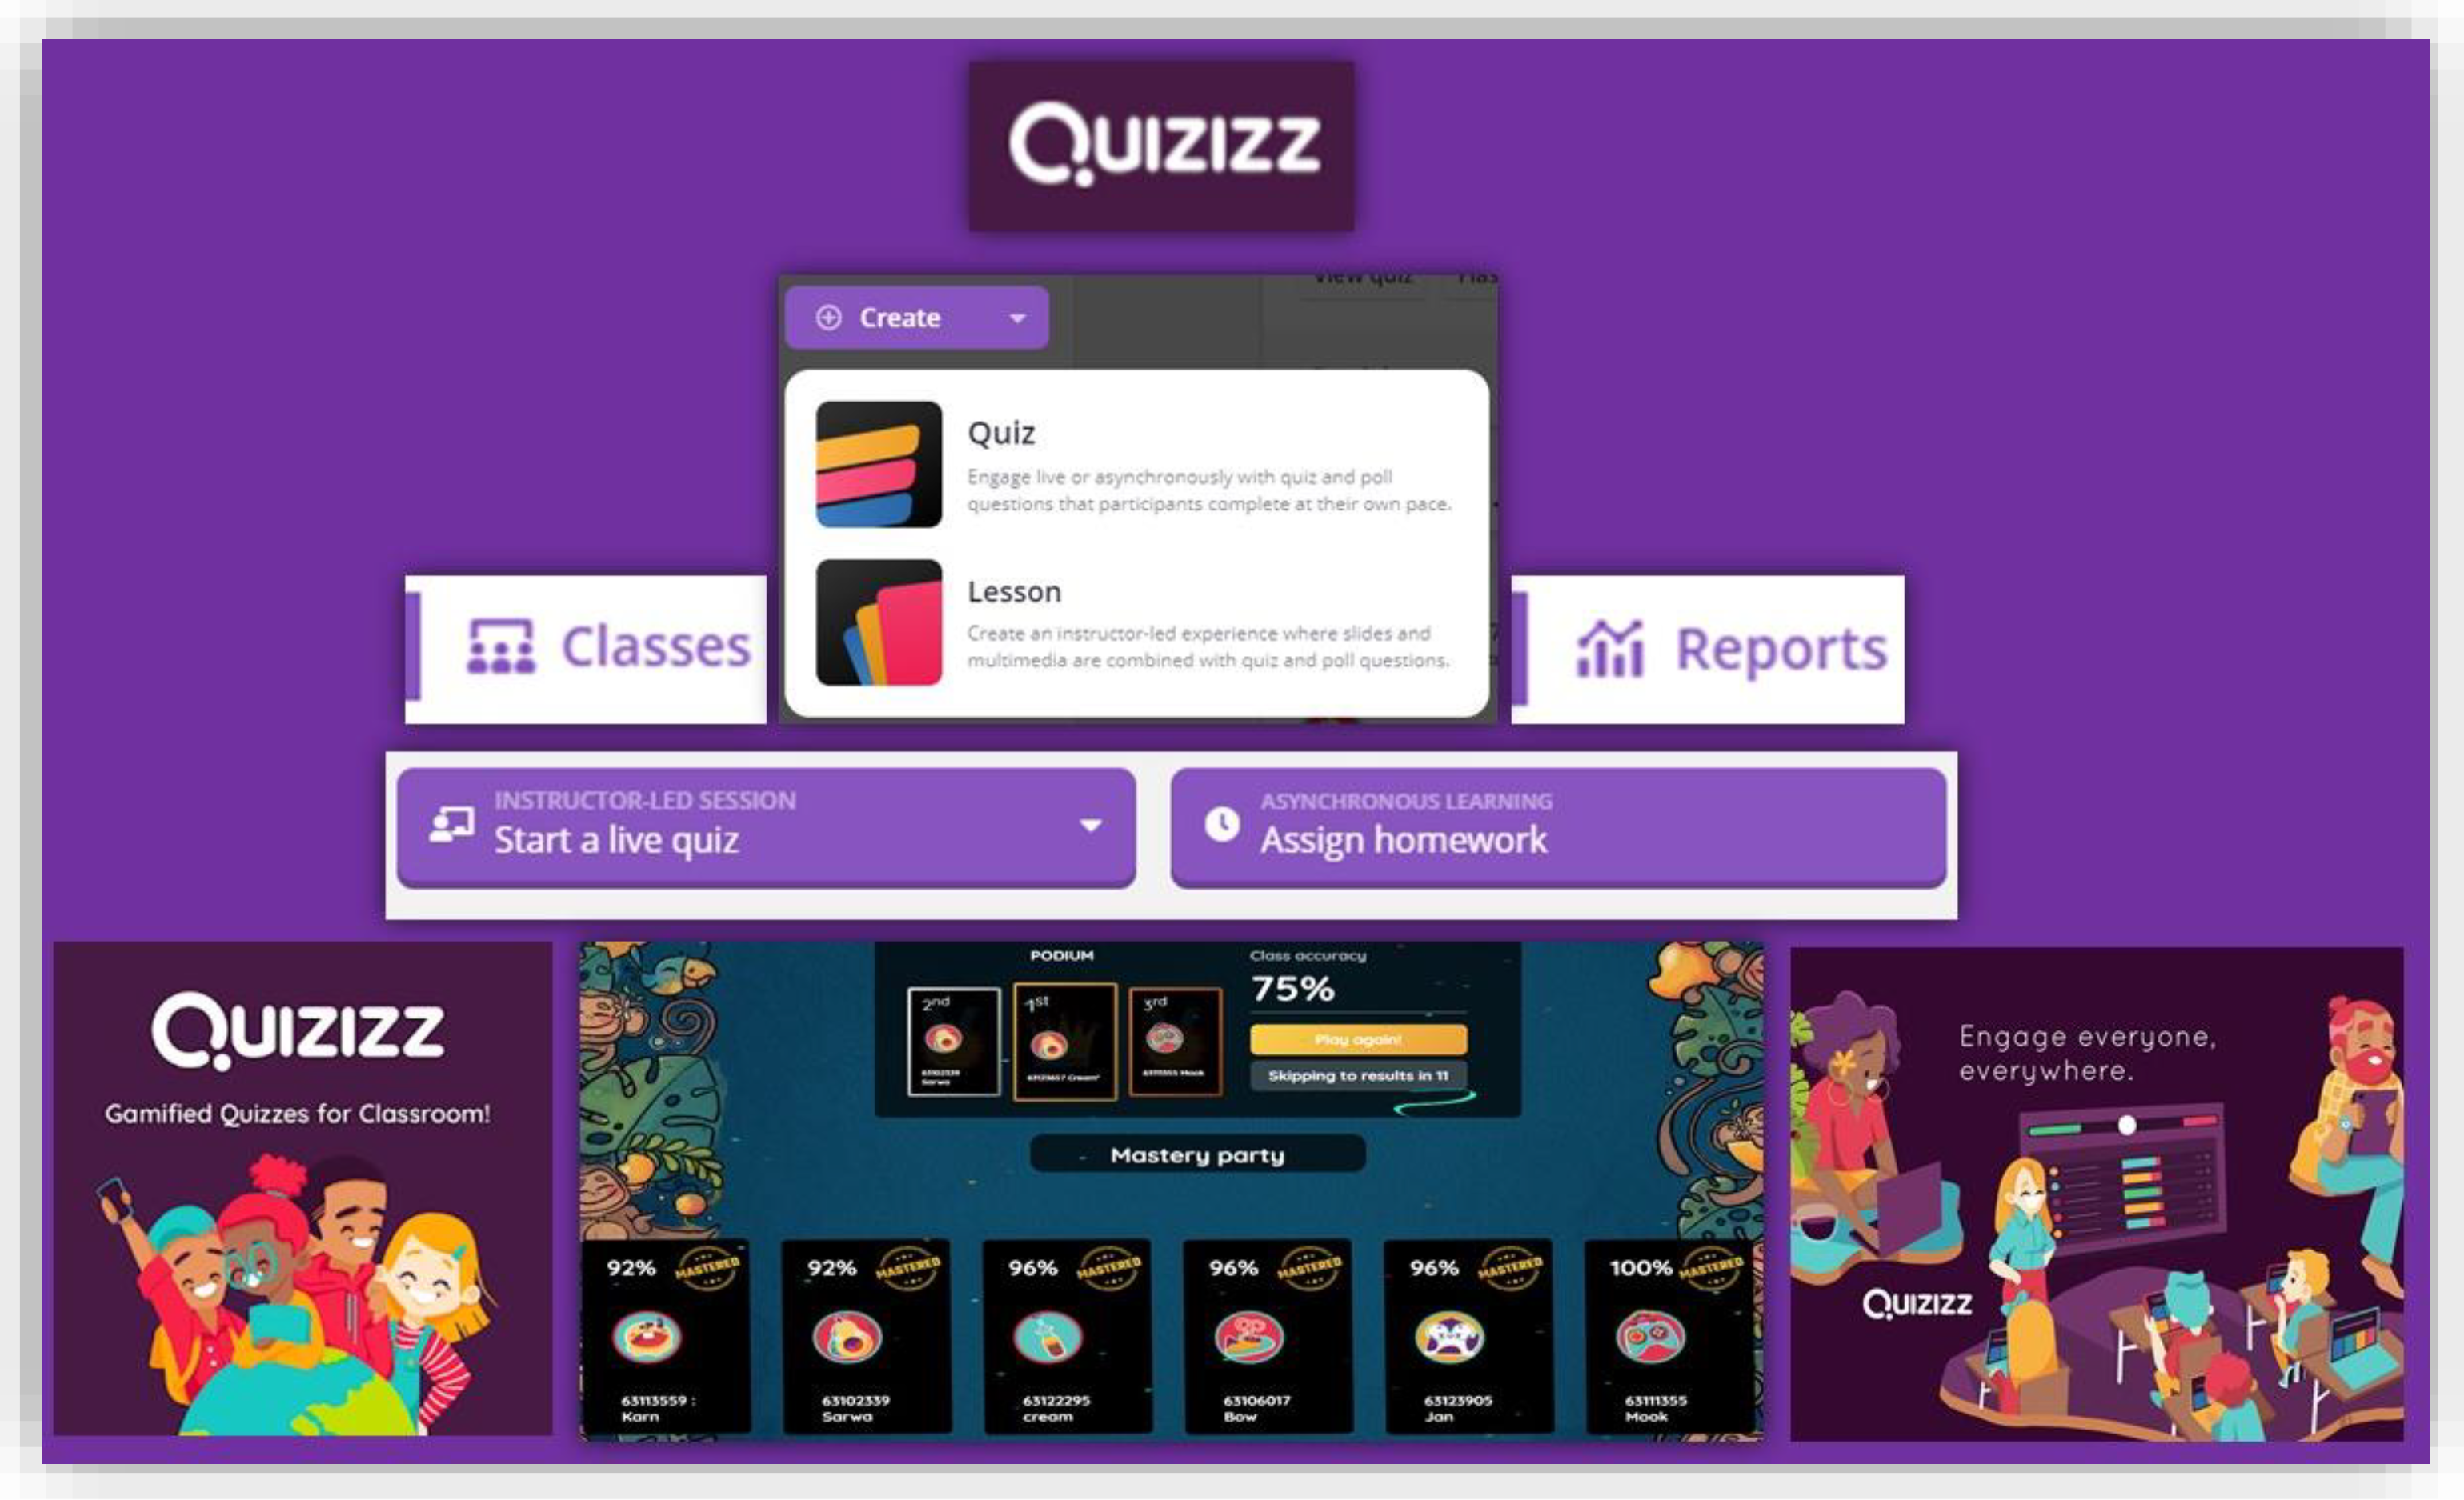 Quizizz on X: Playing solo is ideal for practicing difficult